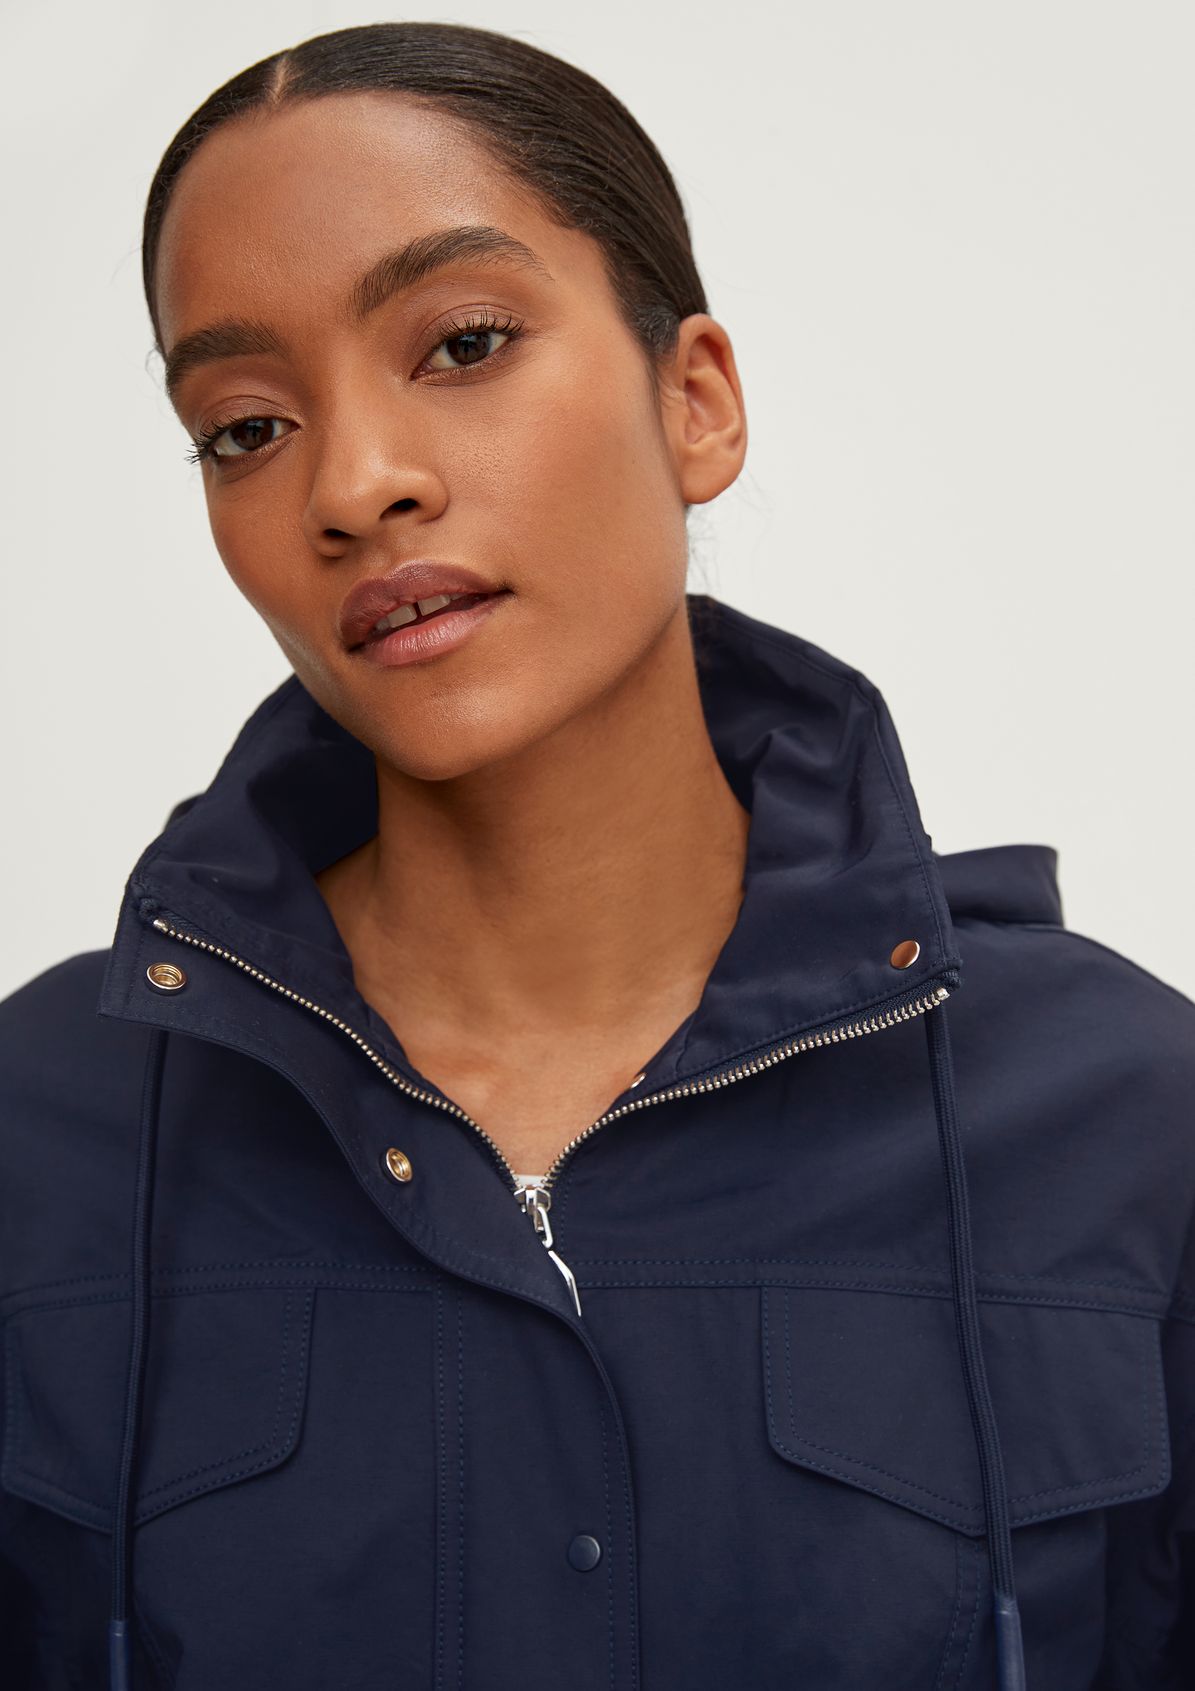 Cropped twill jacket from comma